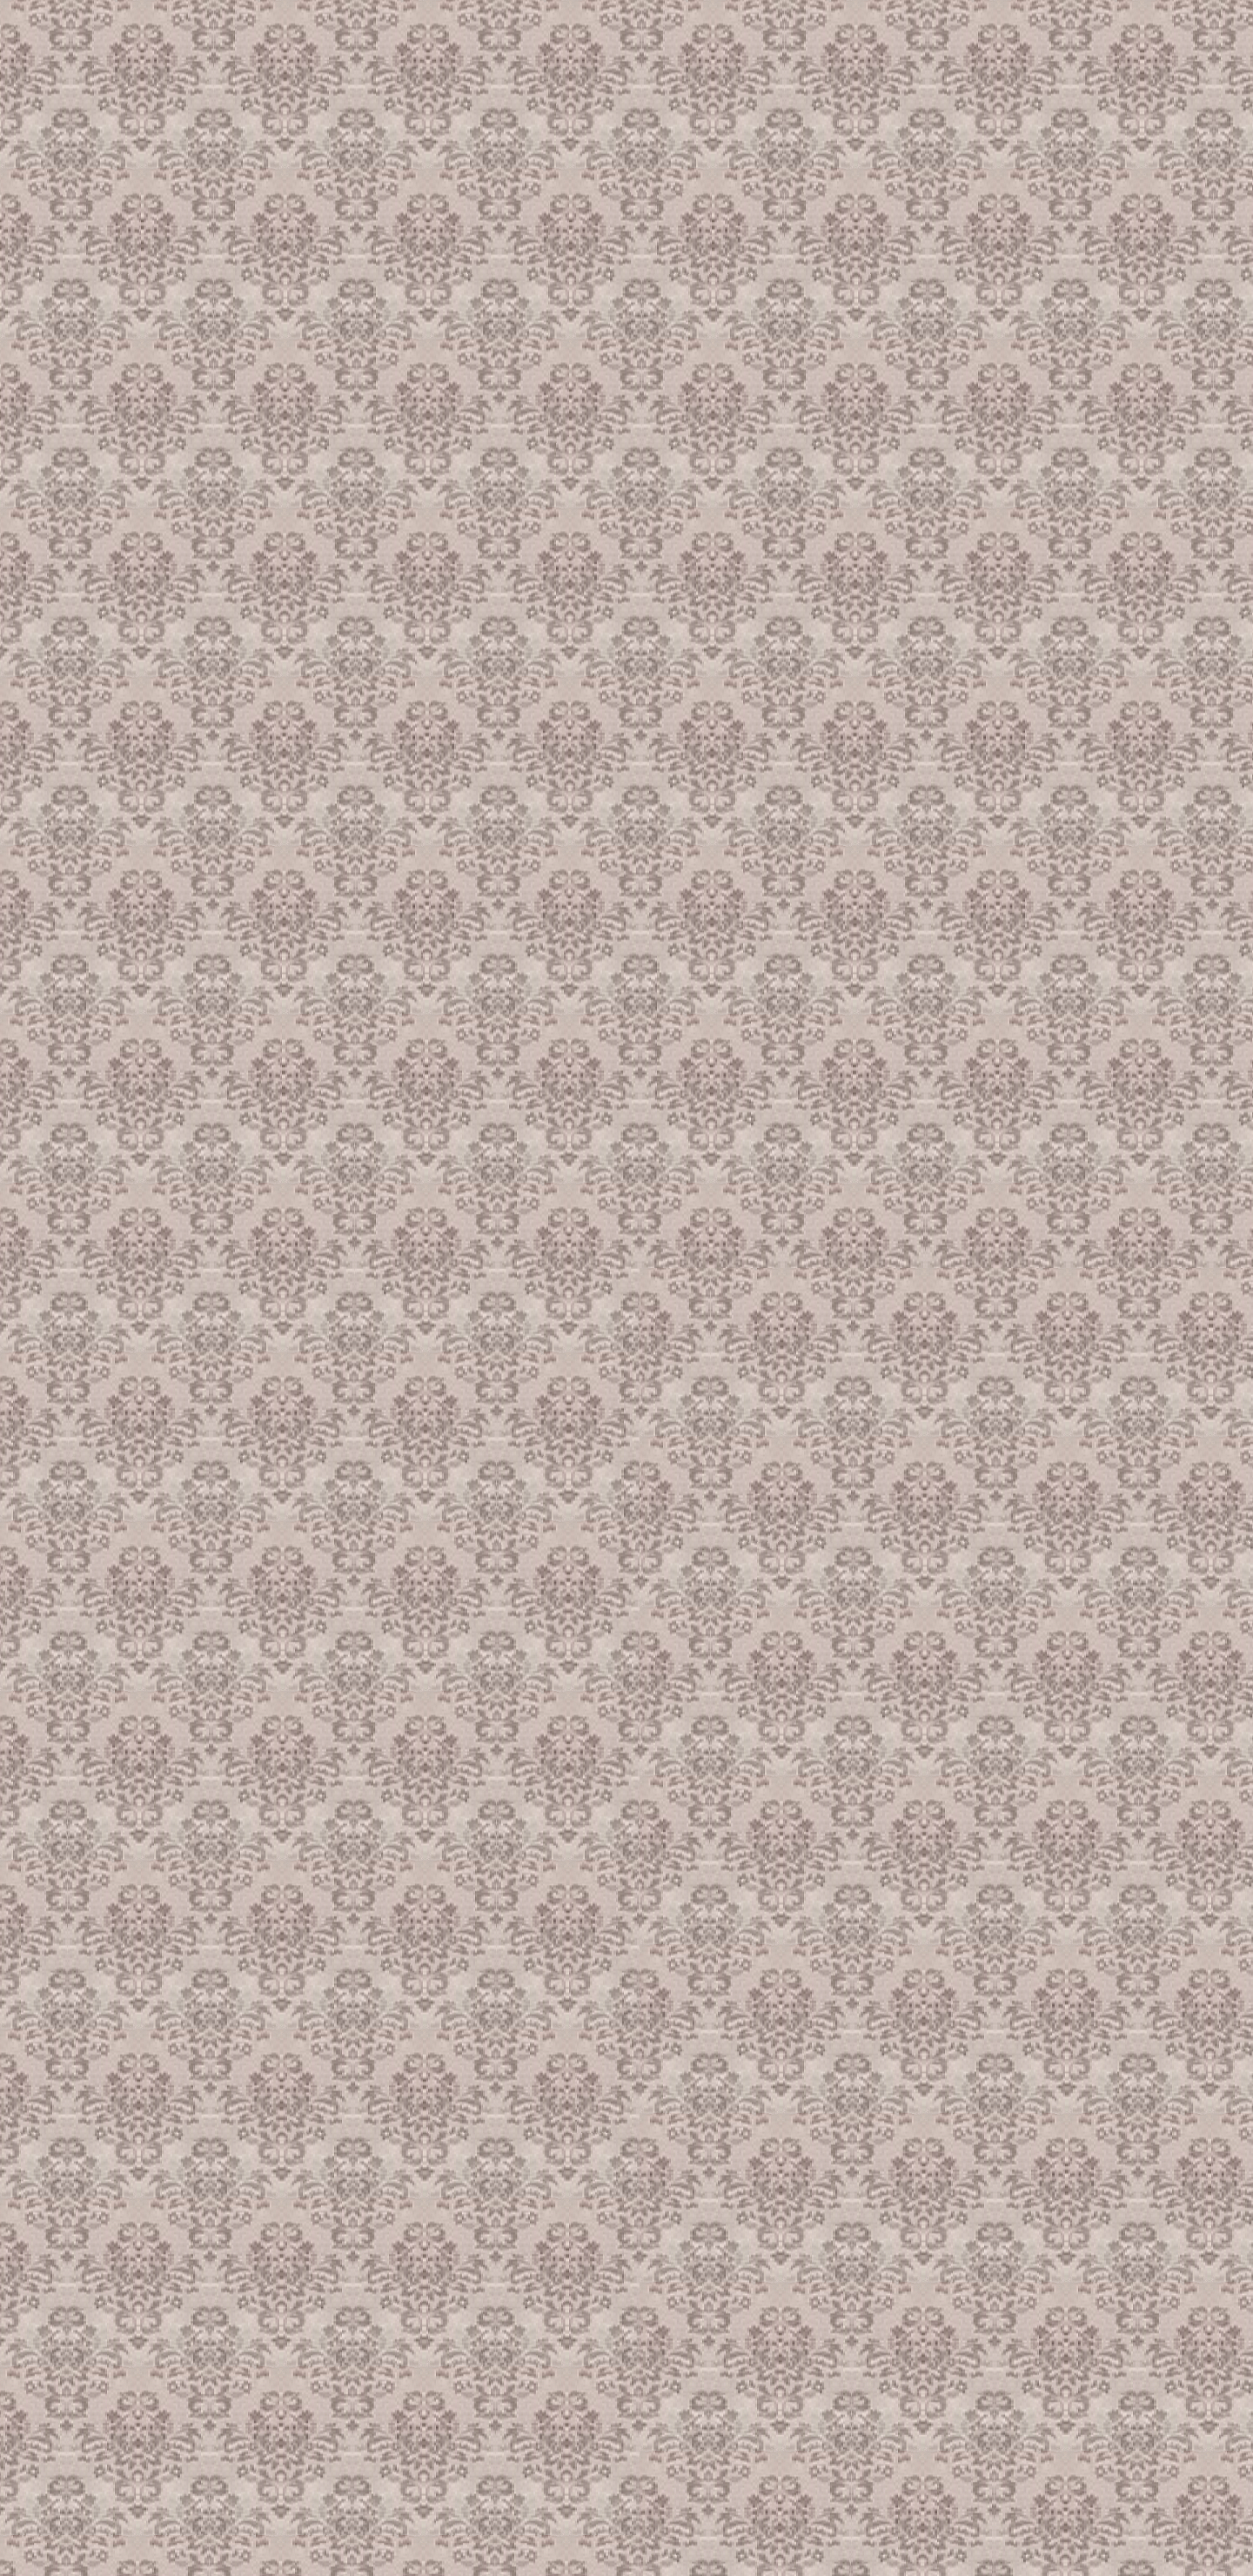 Rusty Lake Wallpaper number.8? Here's the wallpaper from Albert's room in Roots!: rustylake